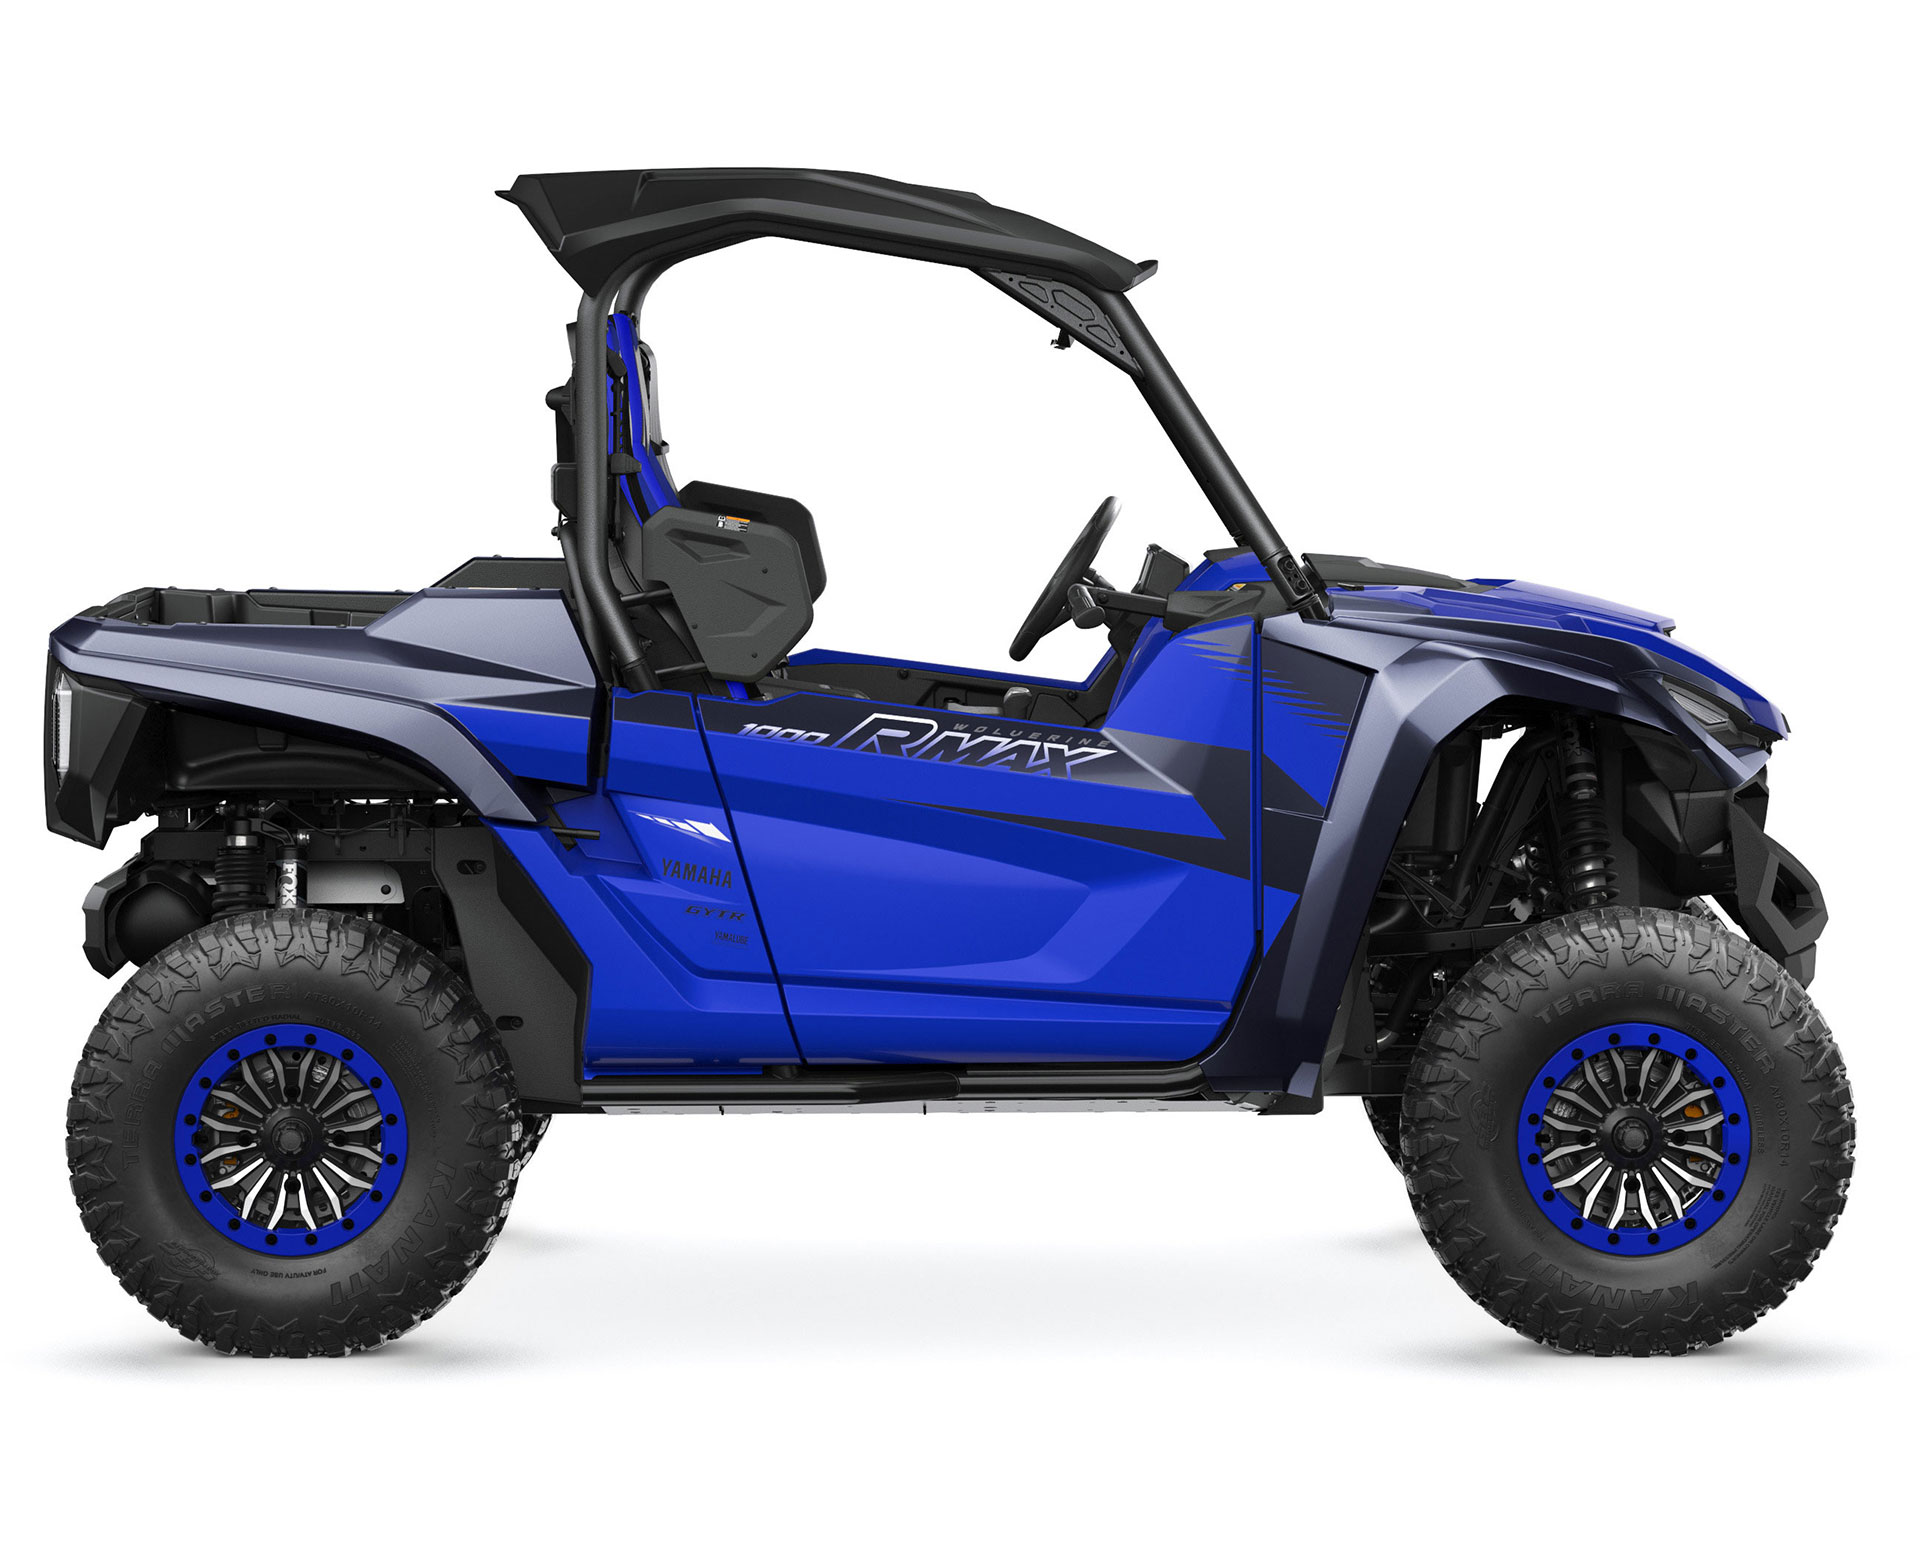 Thumbnail of your customized WOLVERINE(MD) RMAX(MC) 2 1000 SPORT 2023